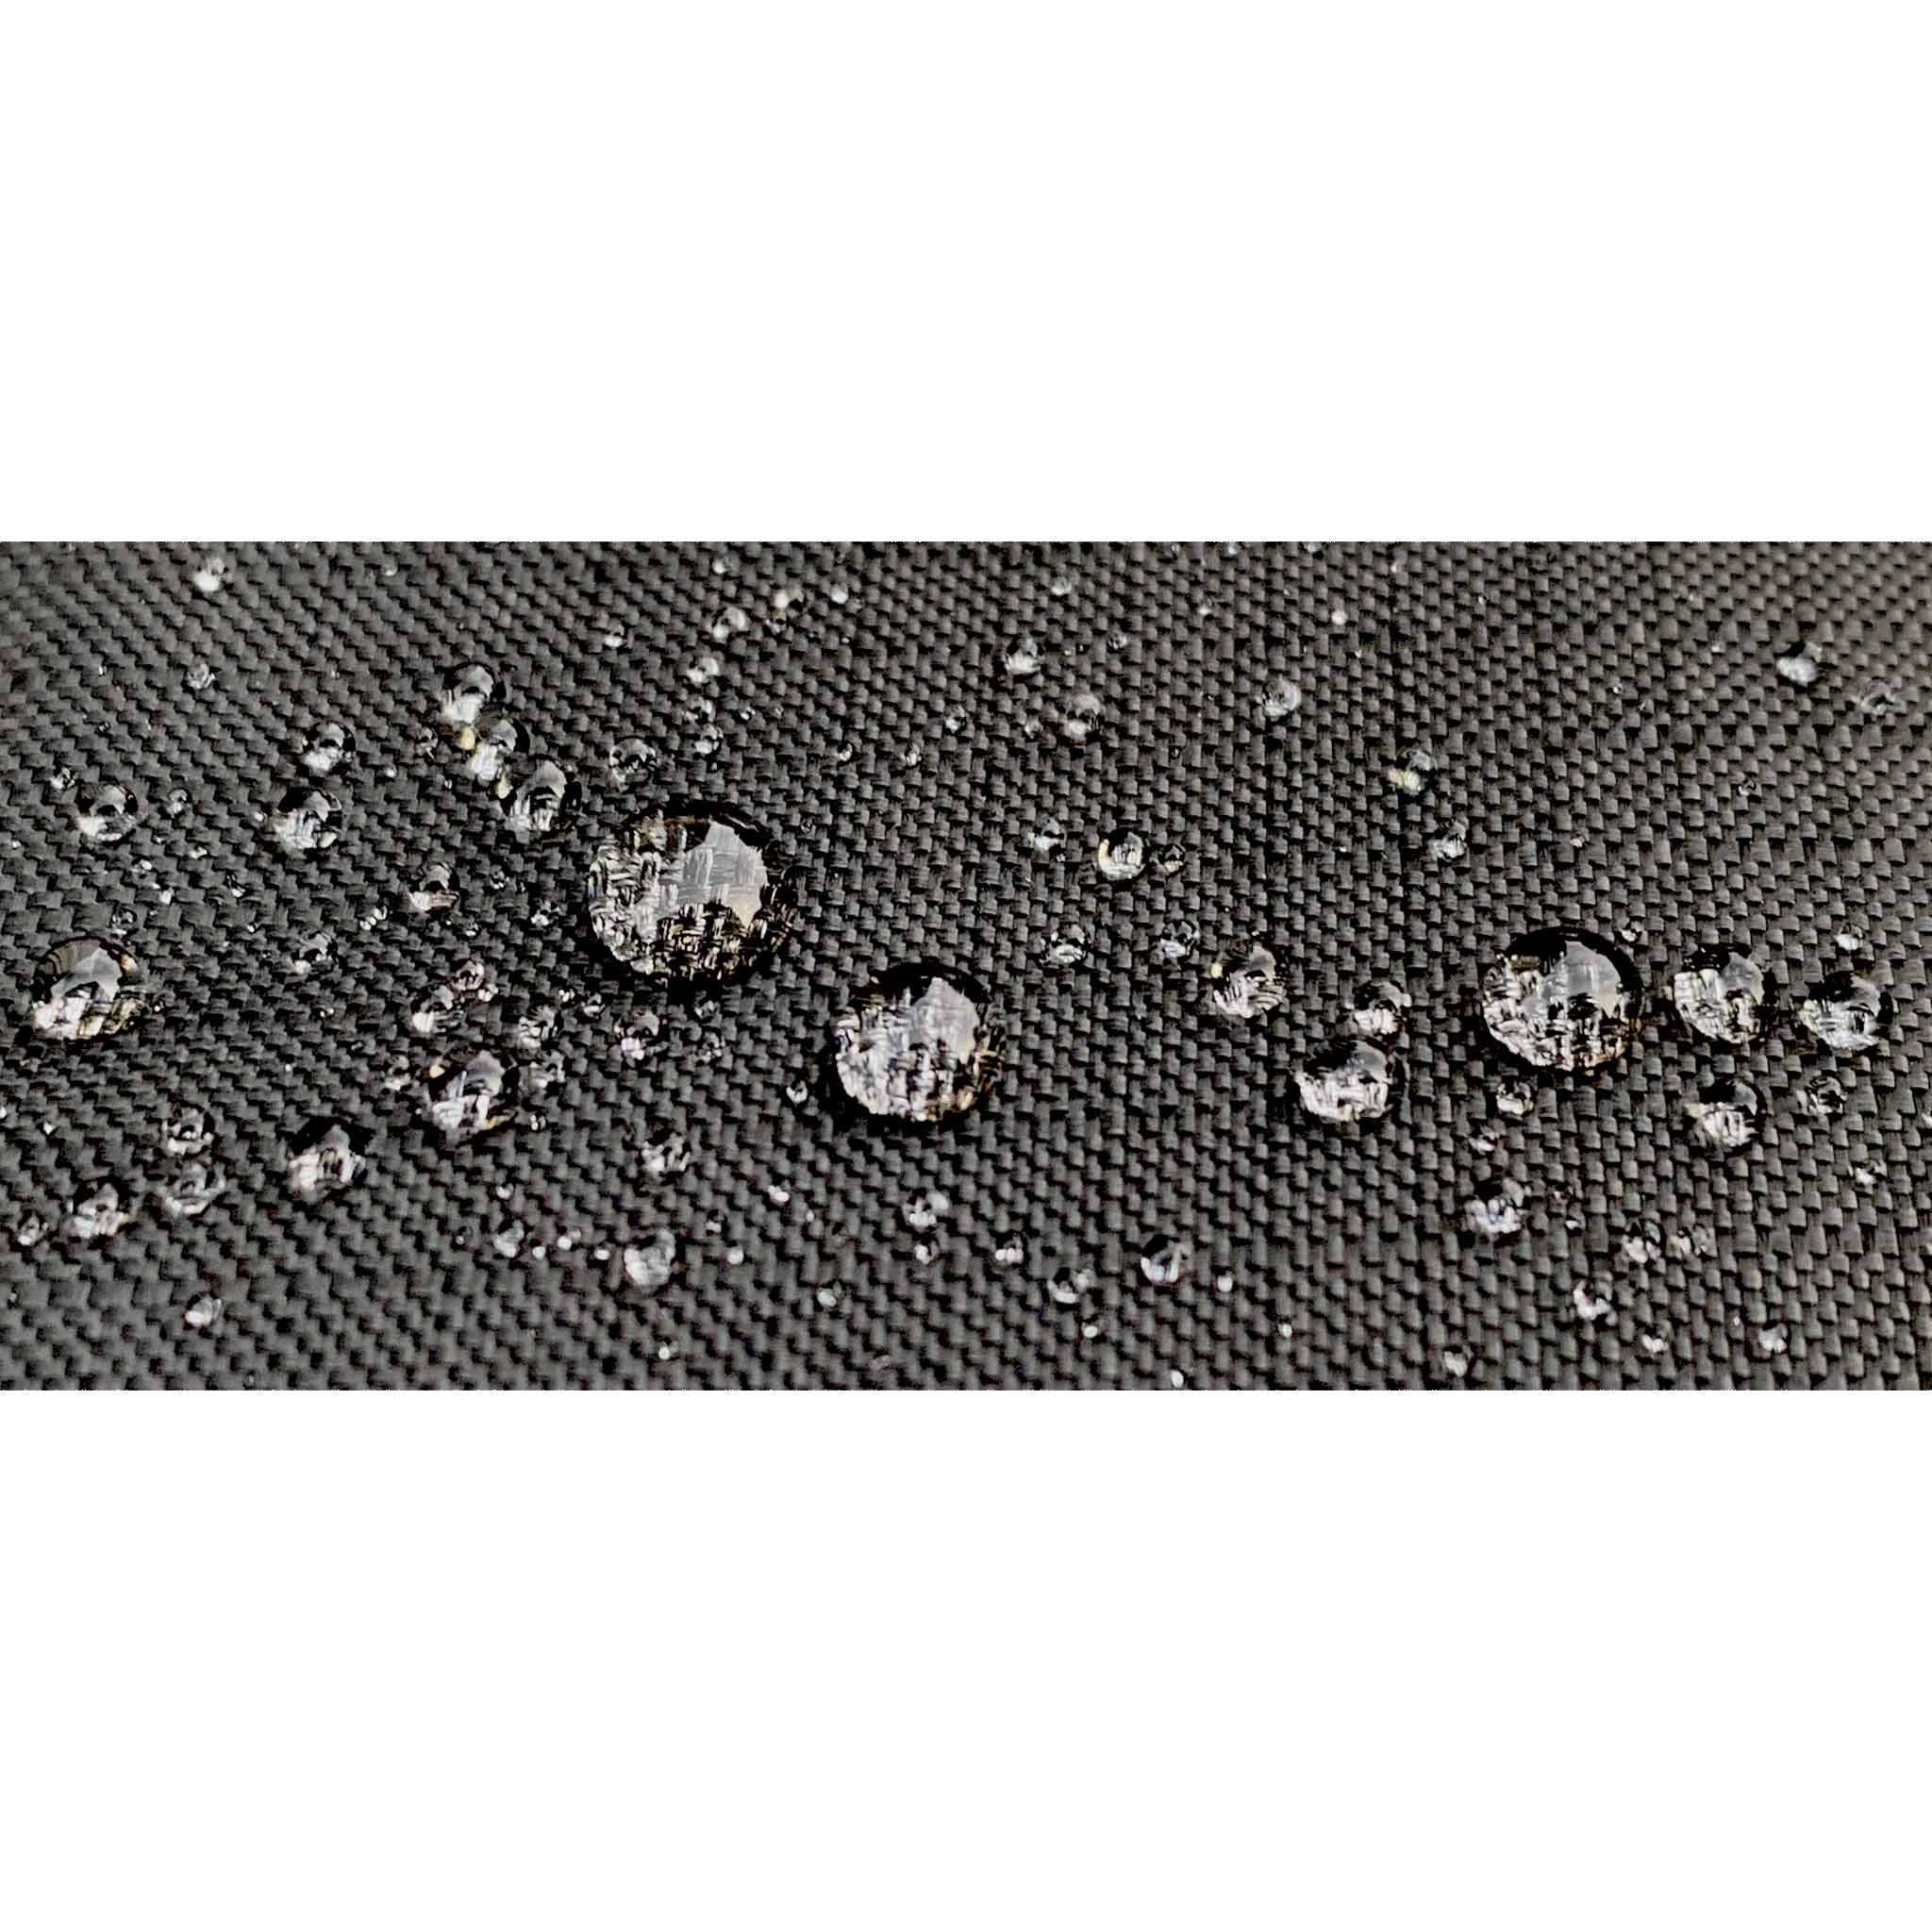 Rain cover for Santos Corner Sofa with Rising Table close up with water droplets